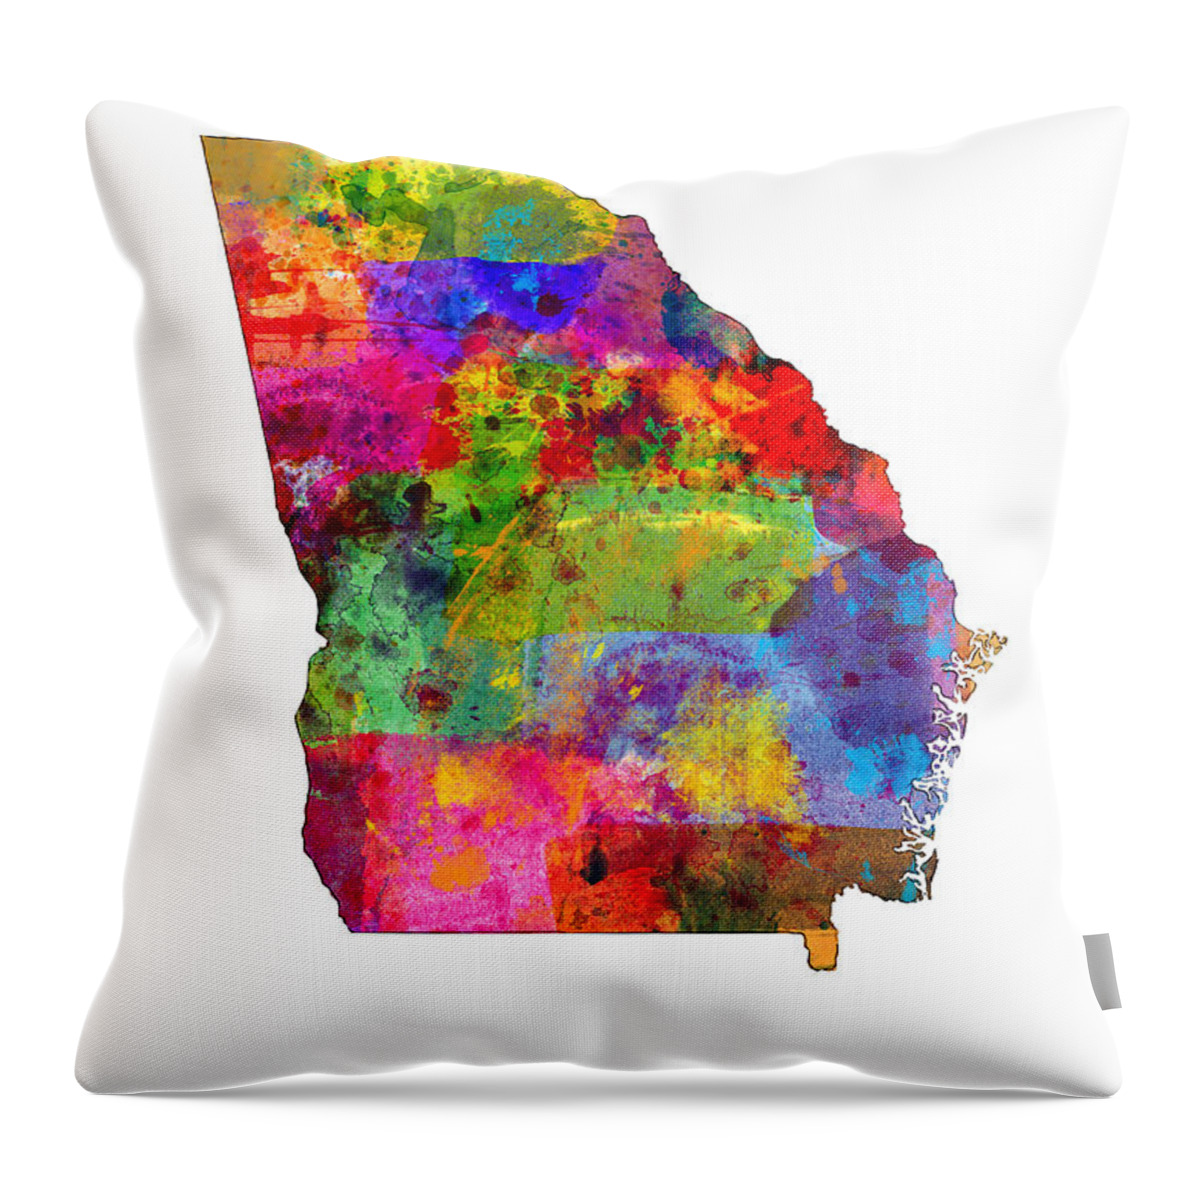 United States Map Throw Pillow featuring the digital art Georgia Map by Michael Tompsett